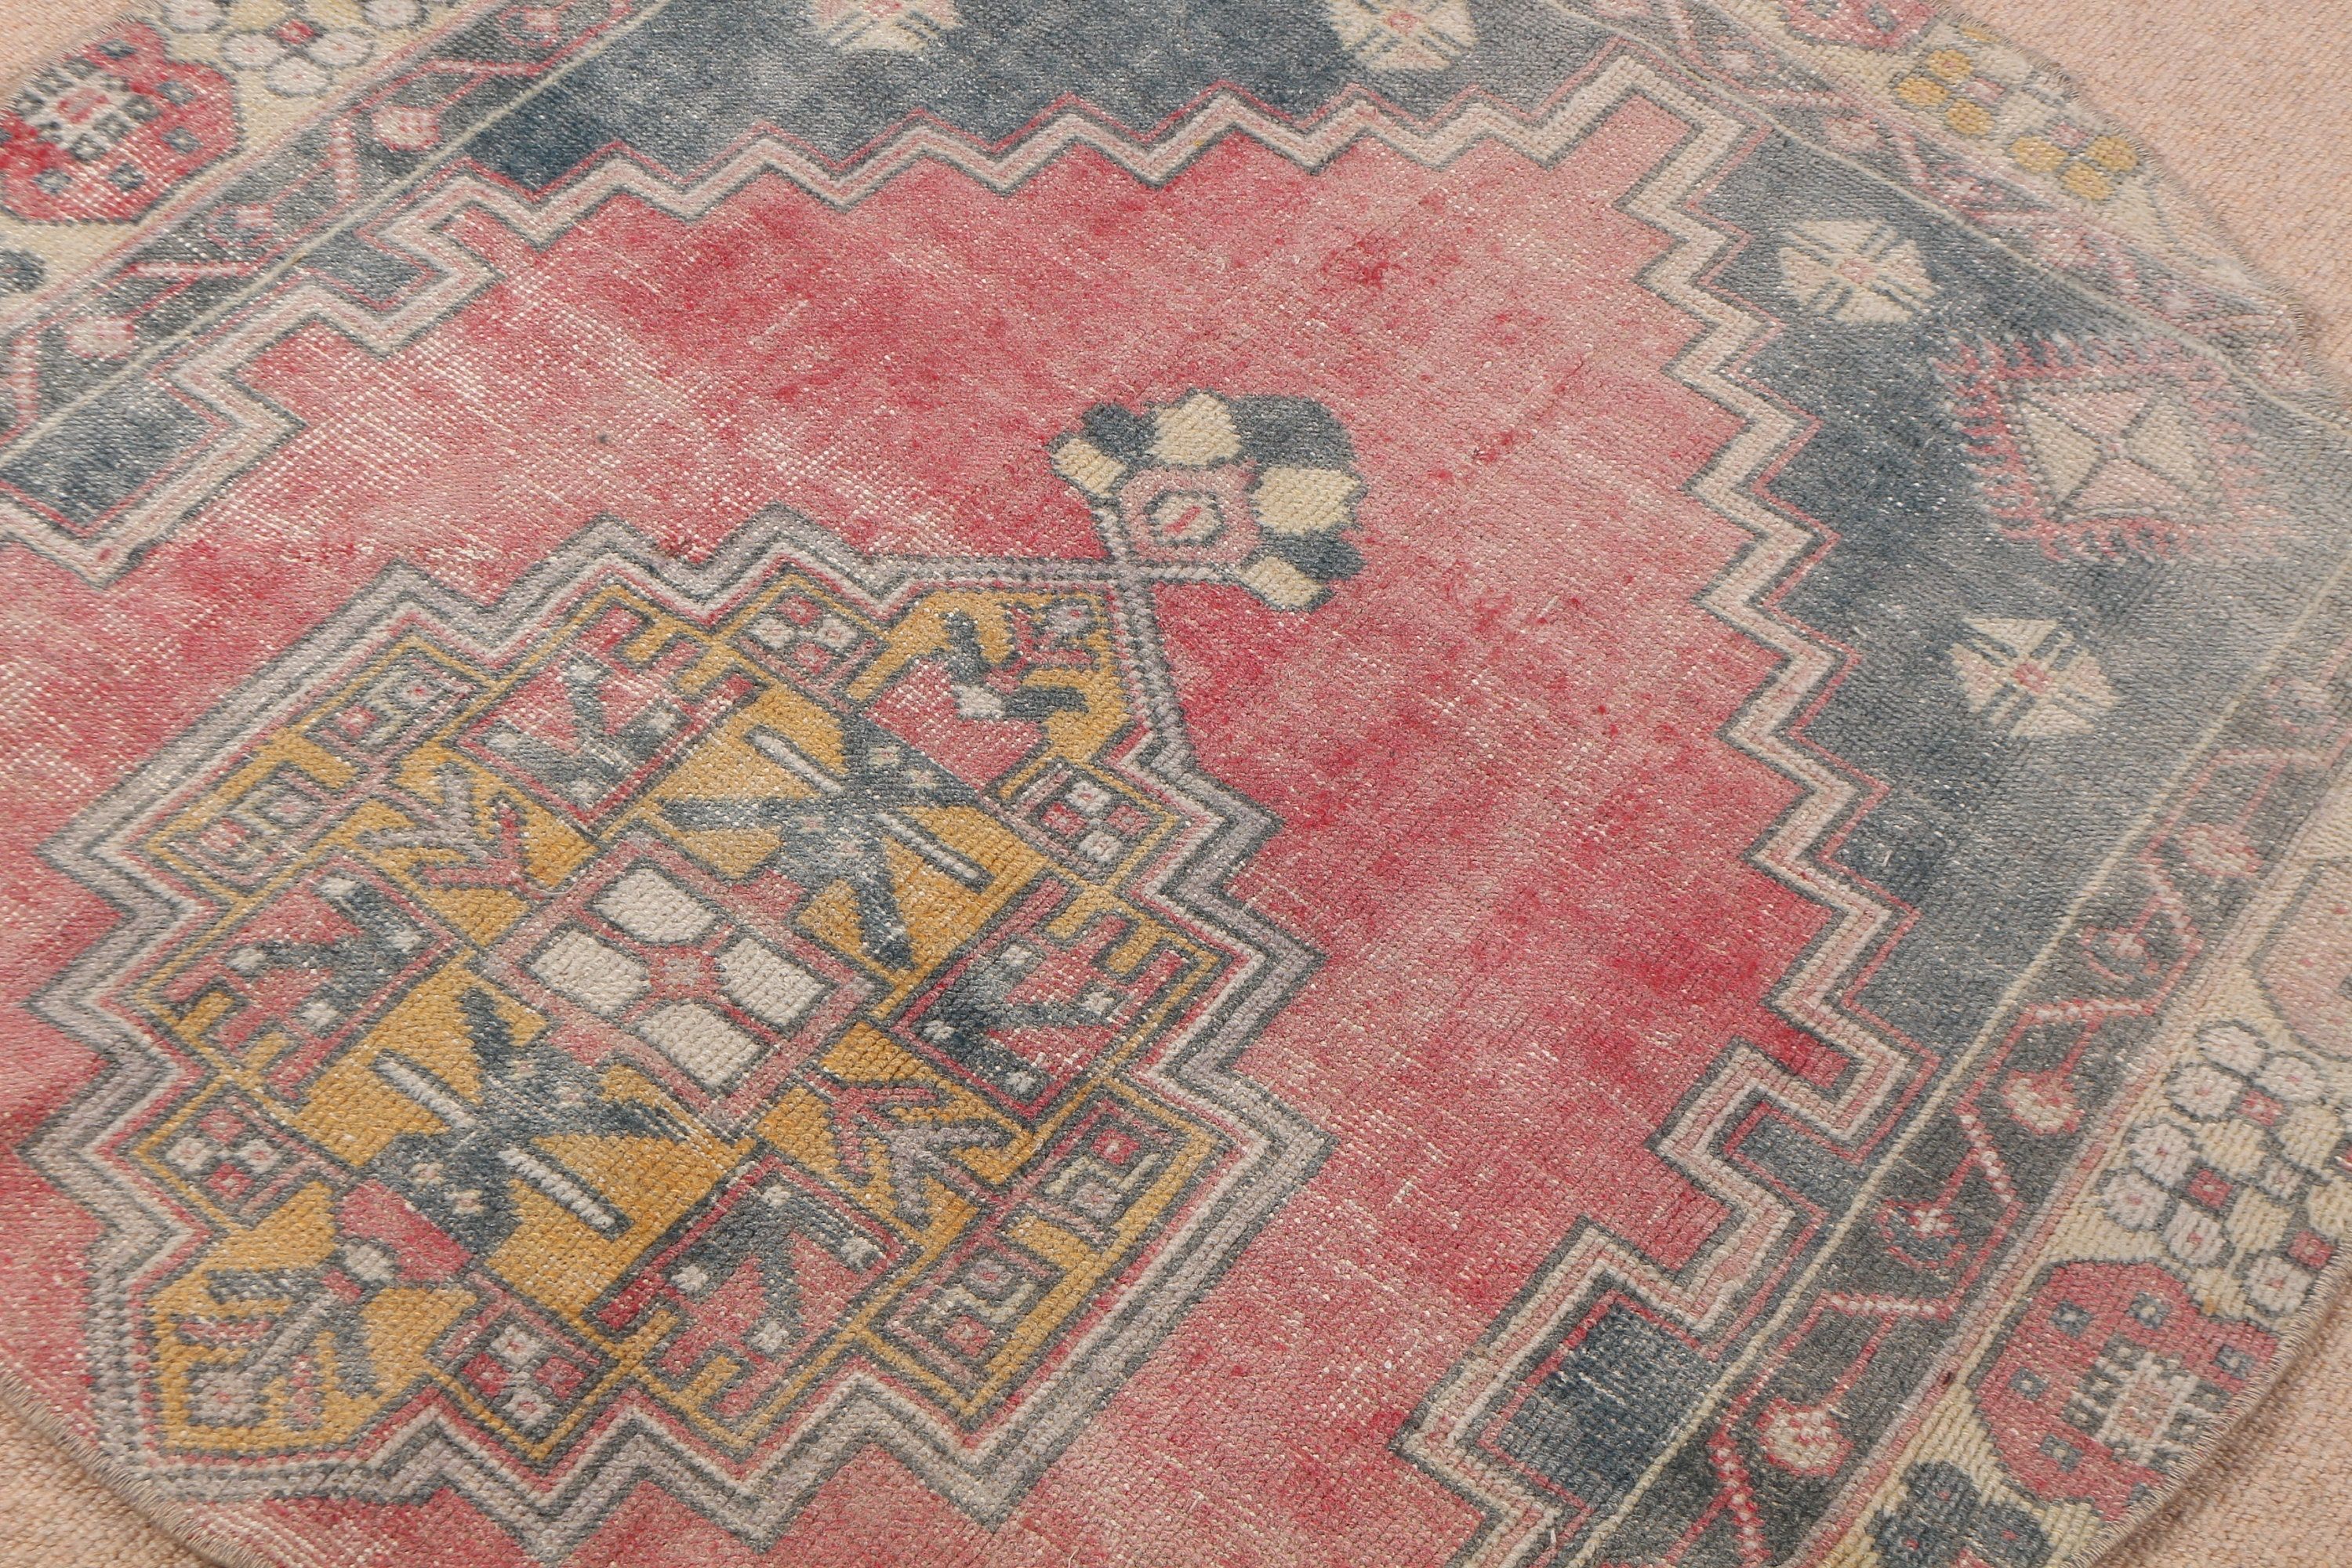 Old Rug, Turkish Rugs, Vintage Rug, Rugs for Nursery, Bedroom Rugs, Home Decor Rug, Kitchen Rugs, Pink  3.4x3.3 ft Small Rug